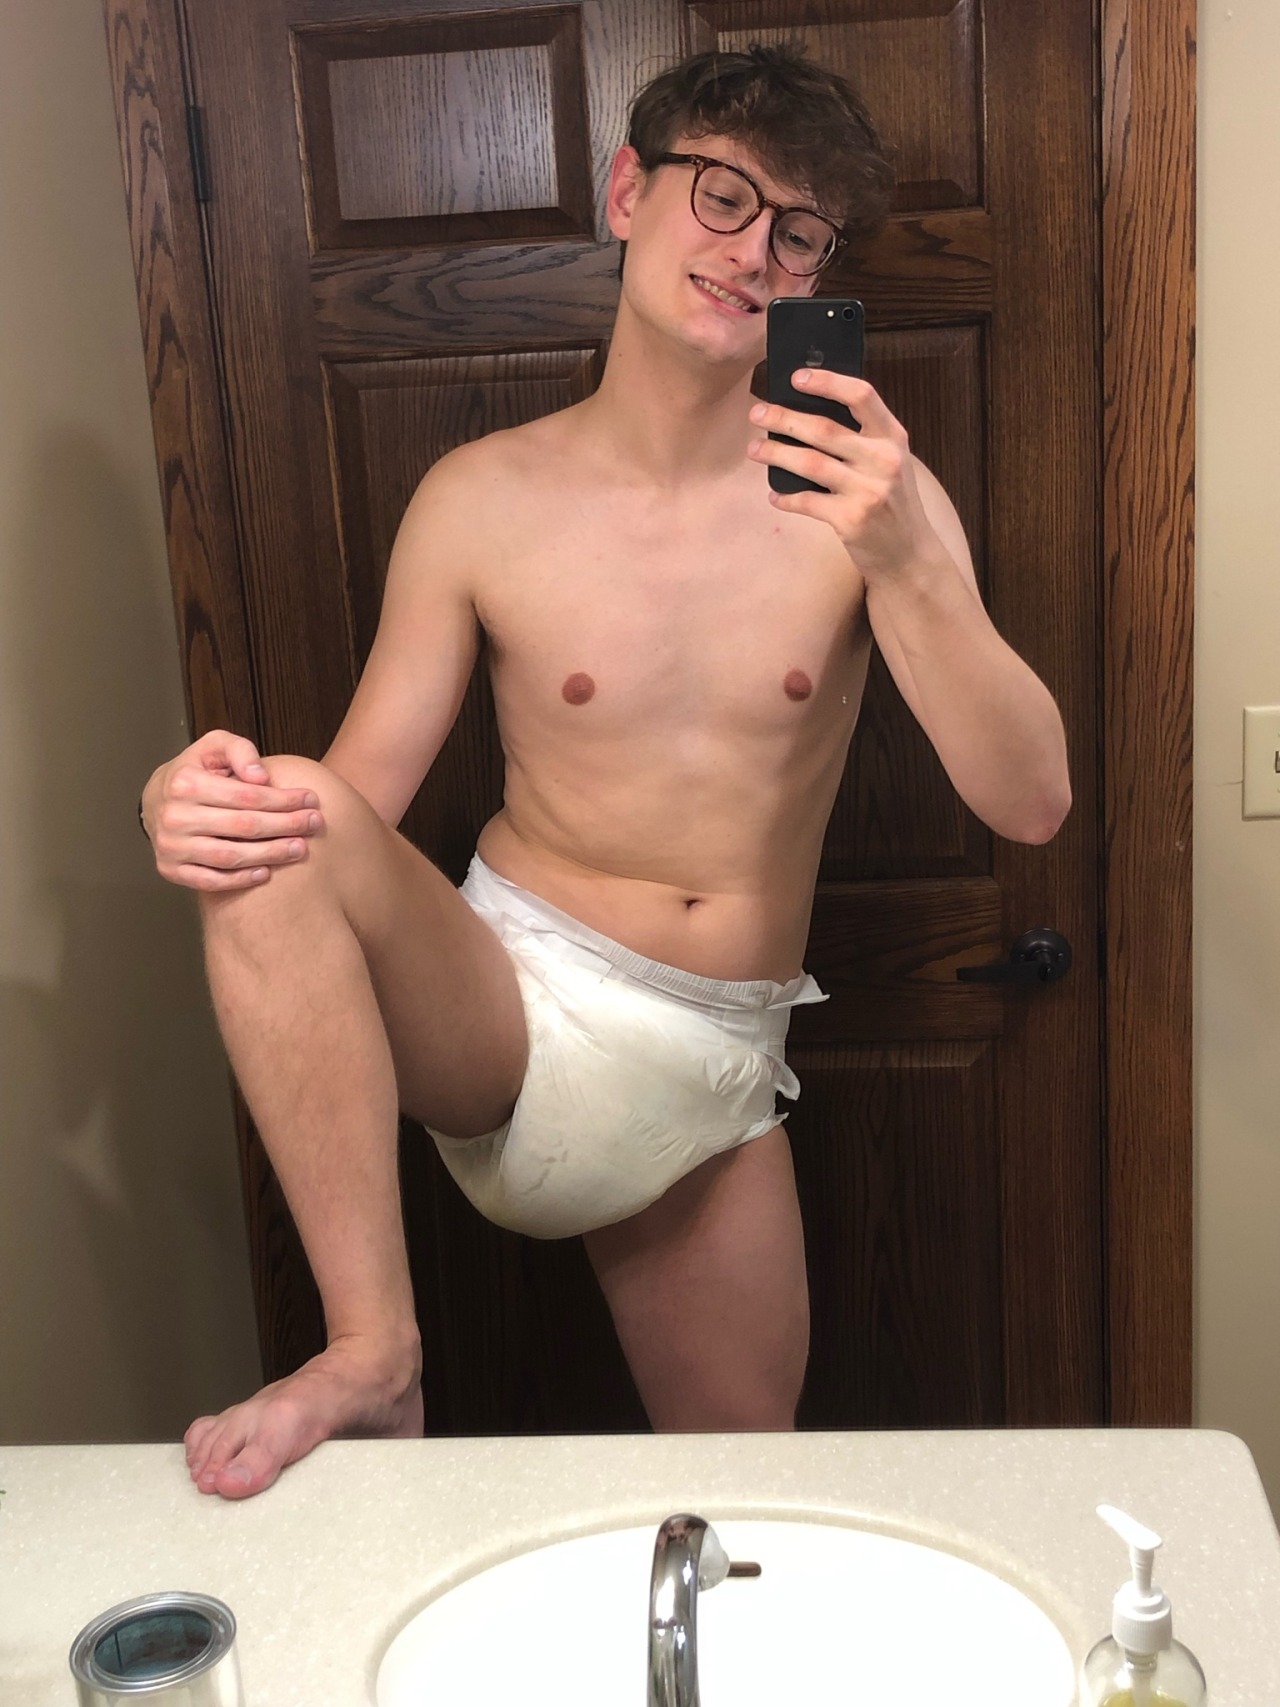 every day in diaper — If I get 100 followers by the end of the day, my...